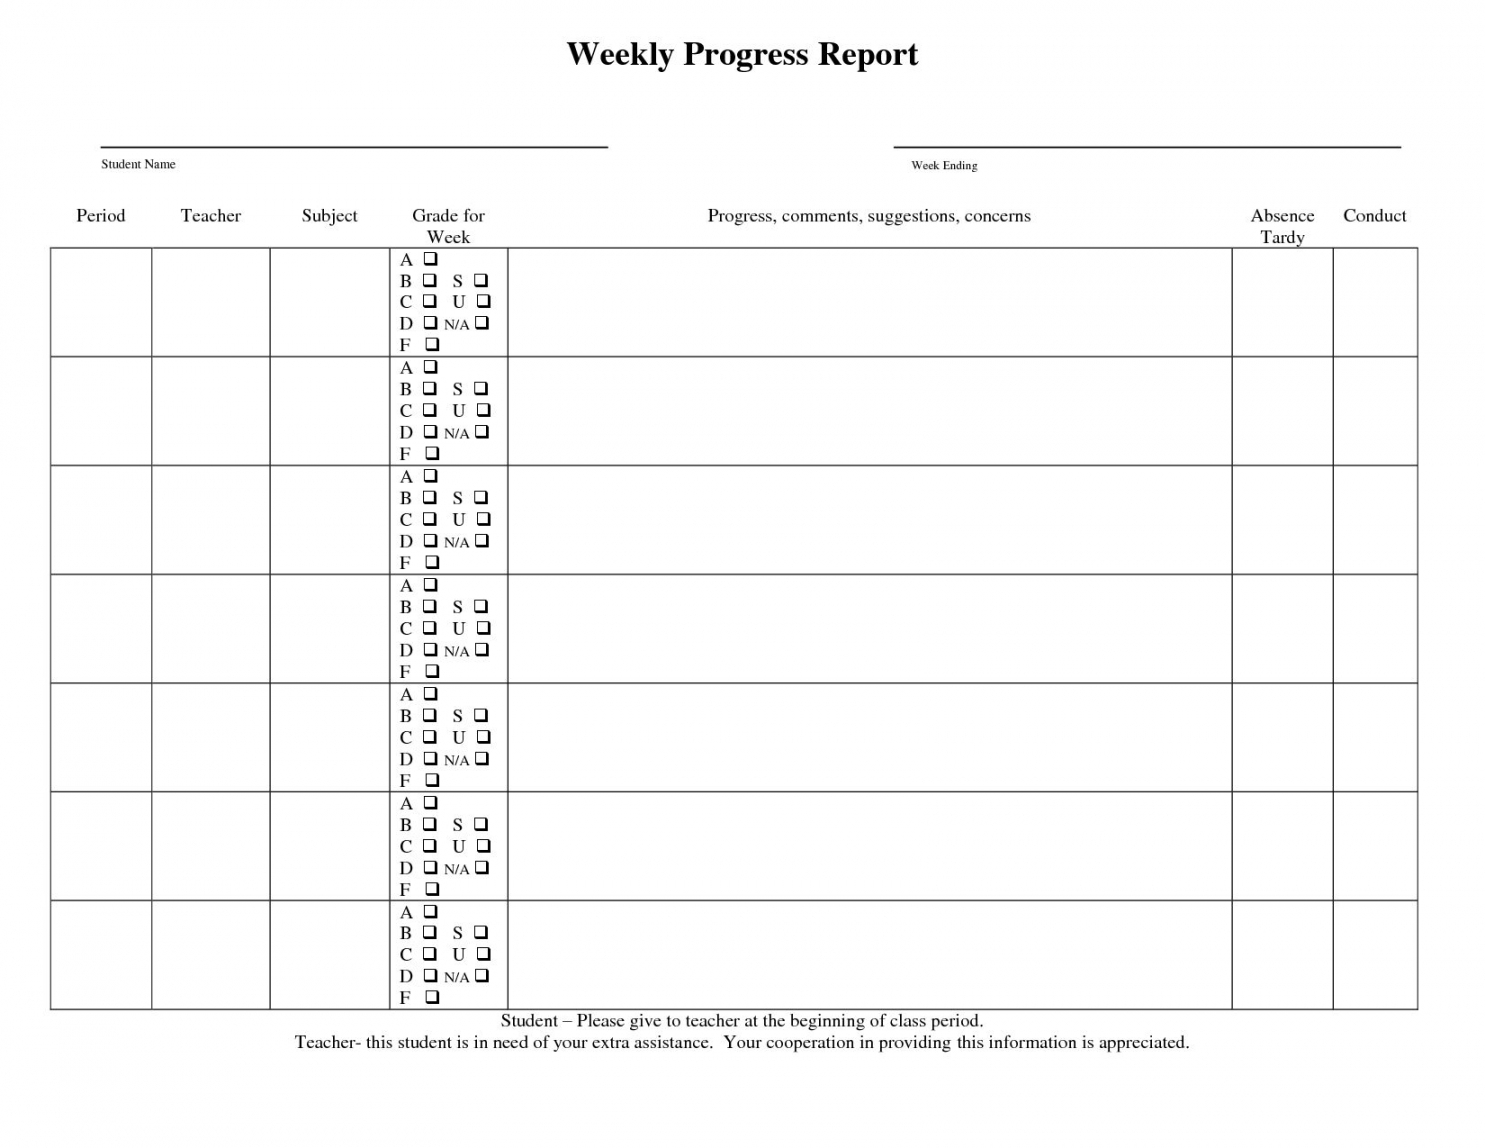 Daily Progress Report Format Excel Construction Glendale Throughout Construction Daily Progress Report Template